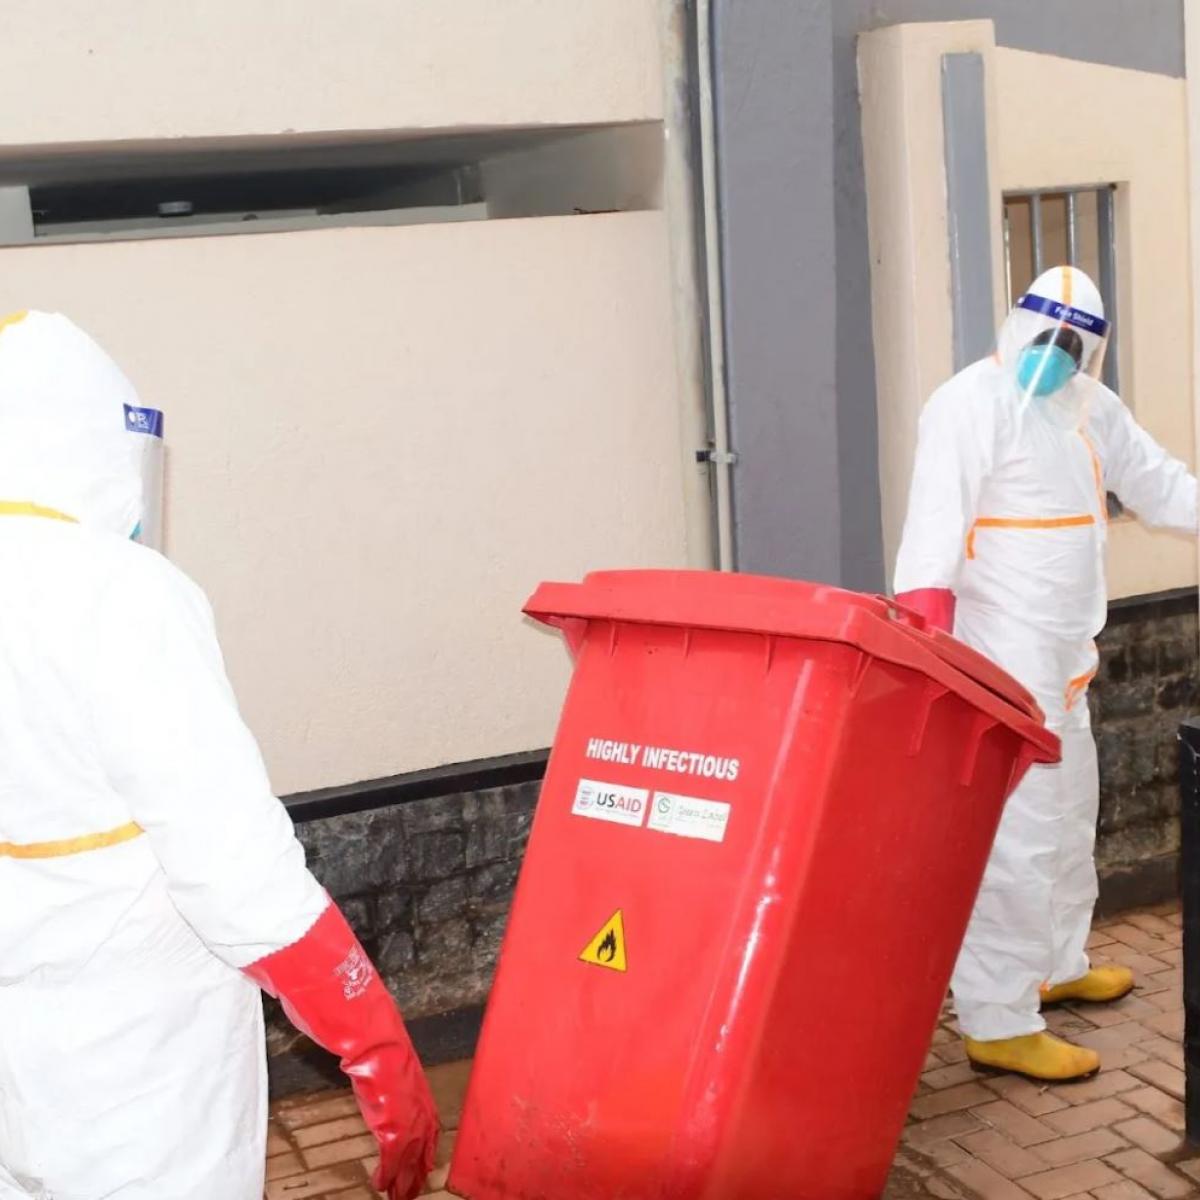 Workers collect and dispose of highly infectious waste from the Ebola isolation unit at Mulago National Referral Hospital. / Green Label Services